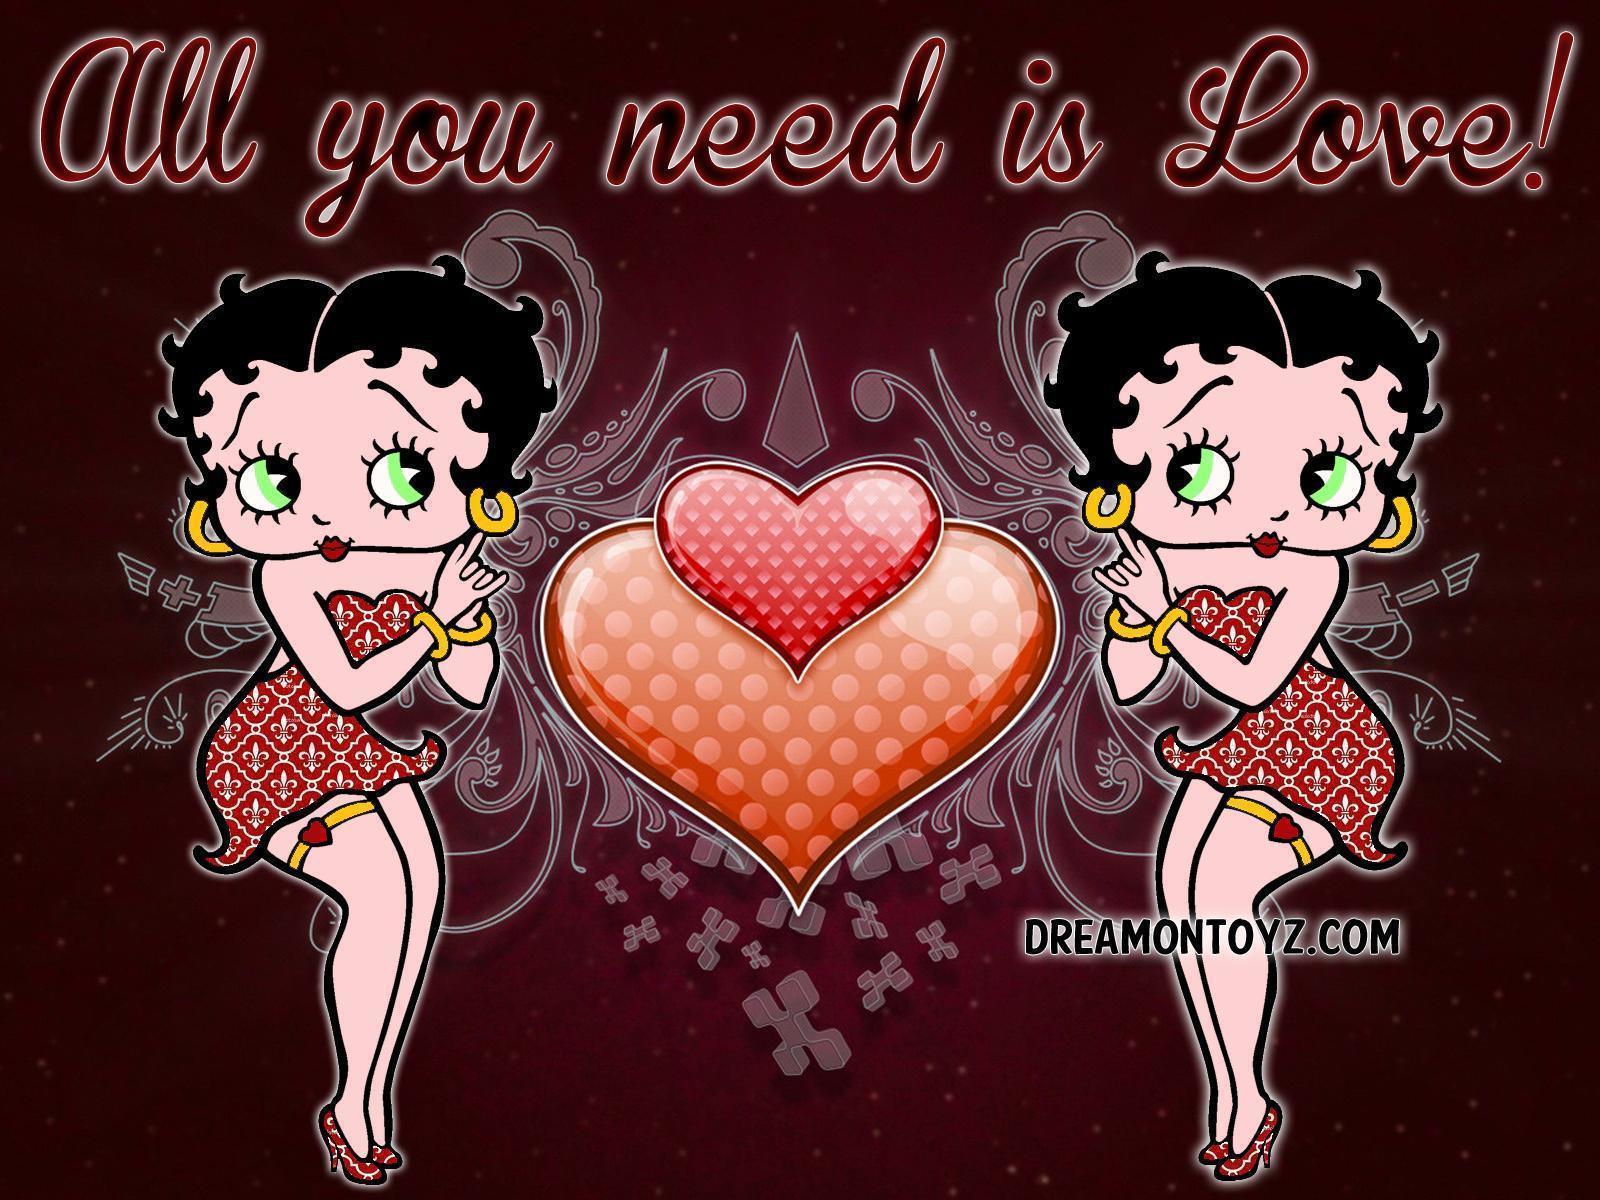 Betty Boop Backgrounds Wallpaper Cave